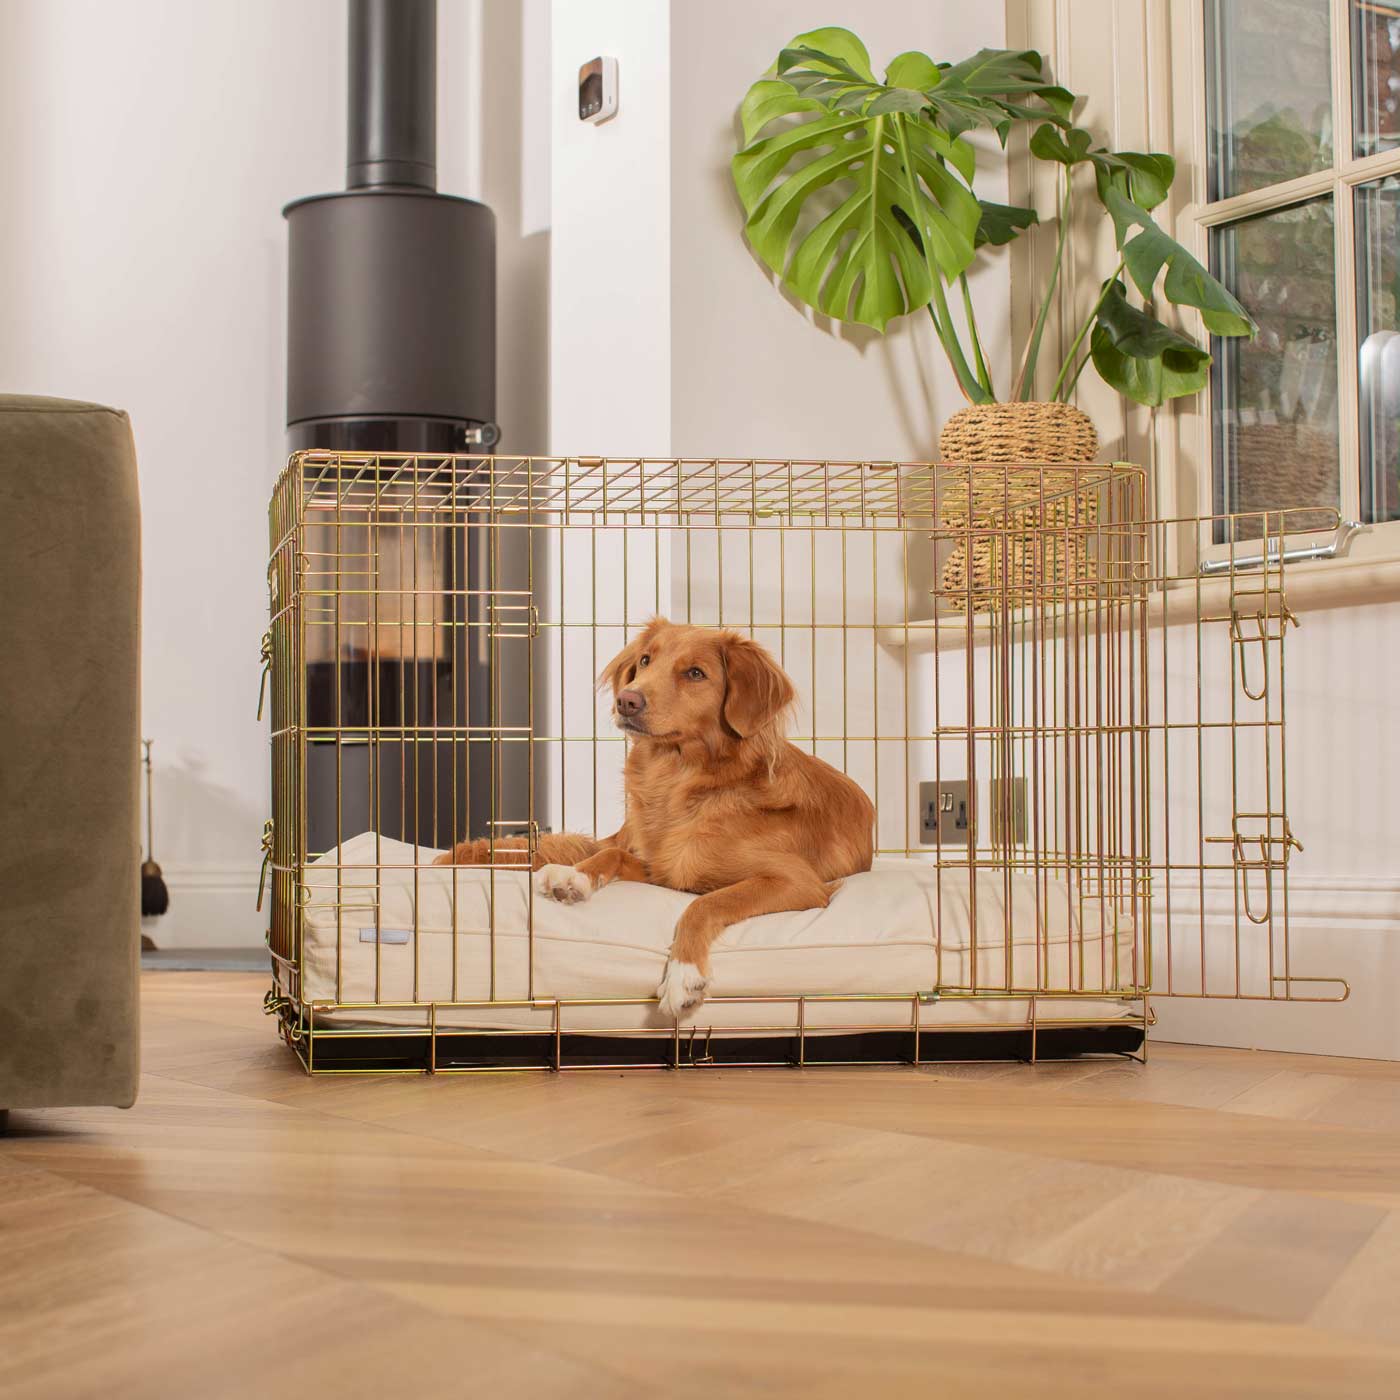 Luxury Dog Cage Cushion in Savanna Bone Cage Cushion, The Perfect Dog Cage Accessory, Available To Personalise Now at Lords & Labradors US